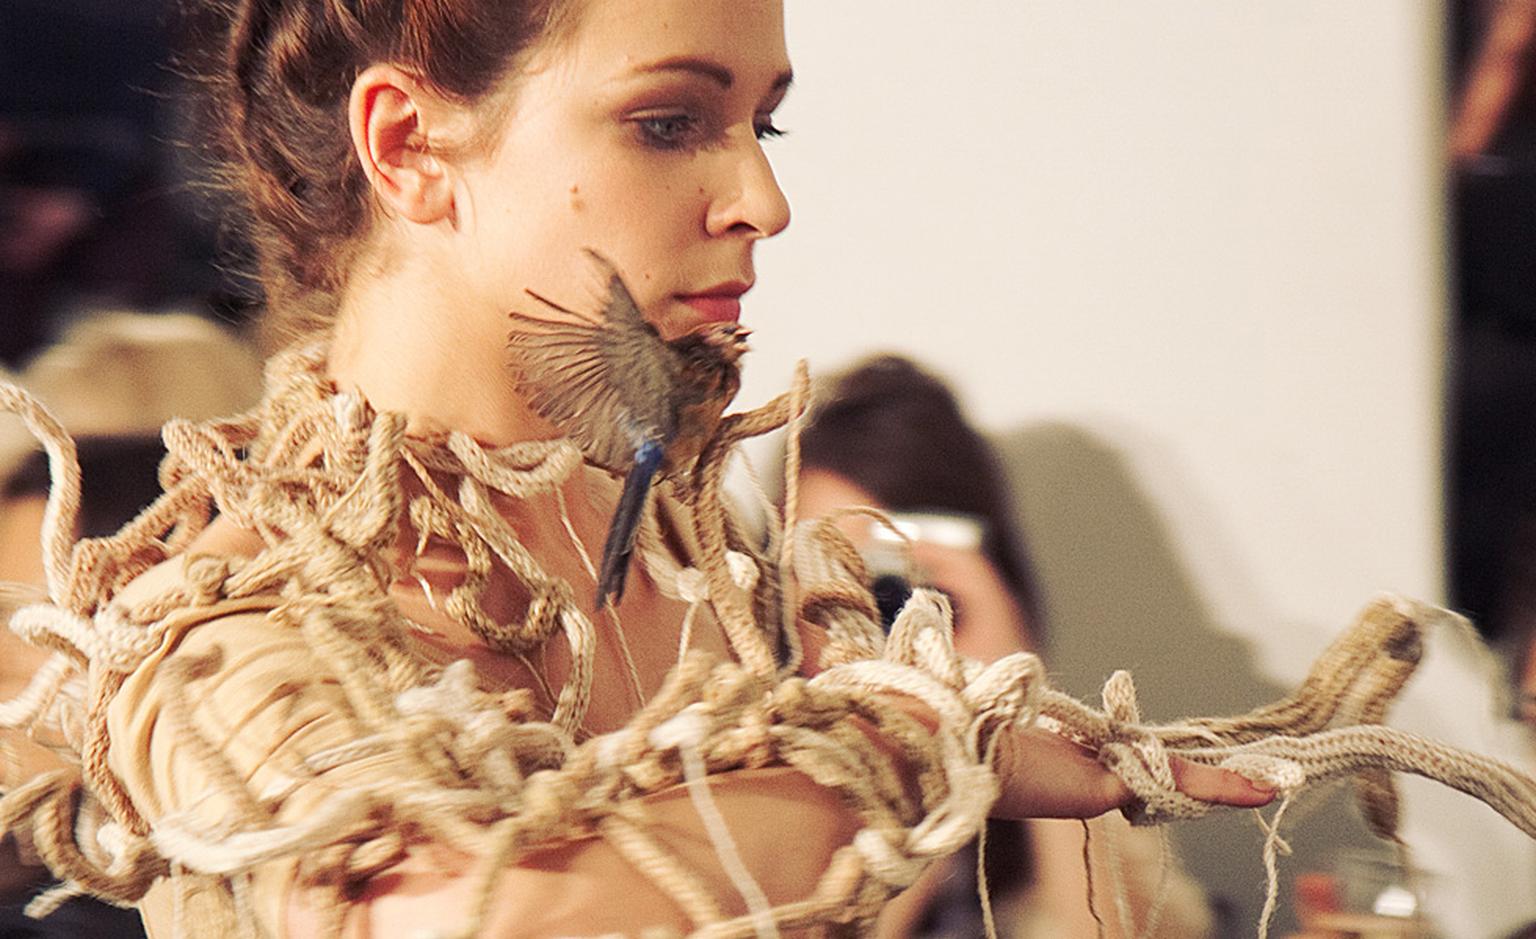 From Central Saint Martin's BA Jewellery Catwalk Show of sustainable jewellery. Designer: Charlotte Le Hardy, made from knitted wood, wire and a dead bird. Photo: Sam Davies